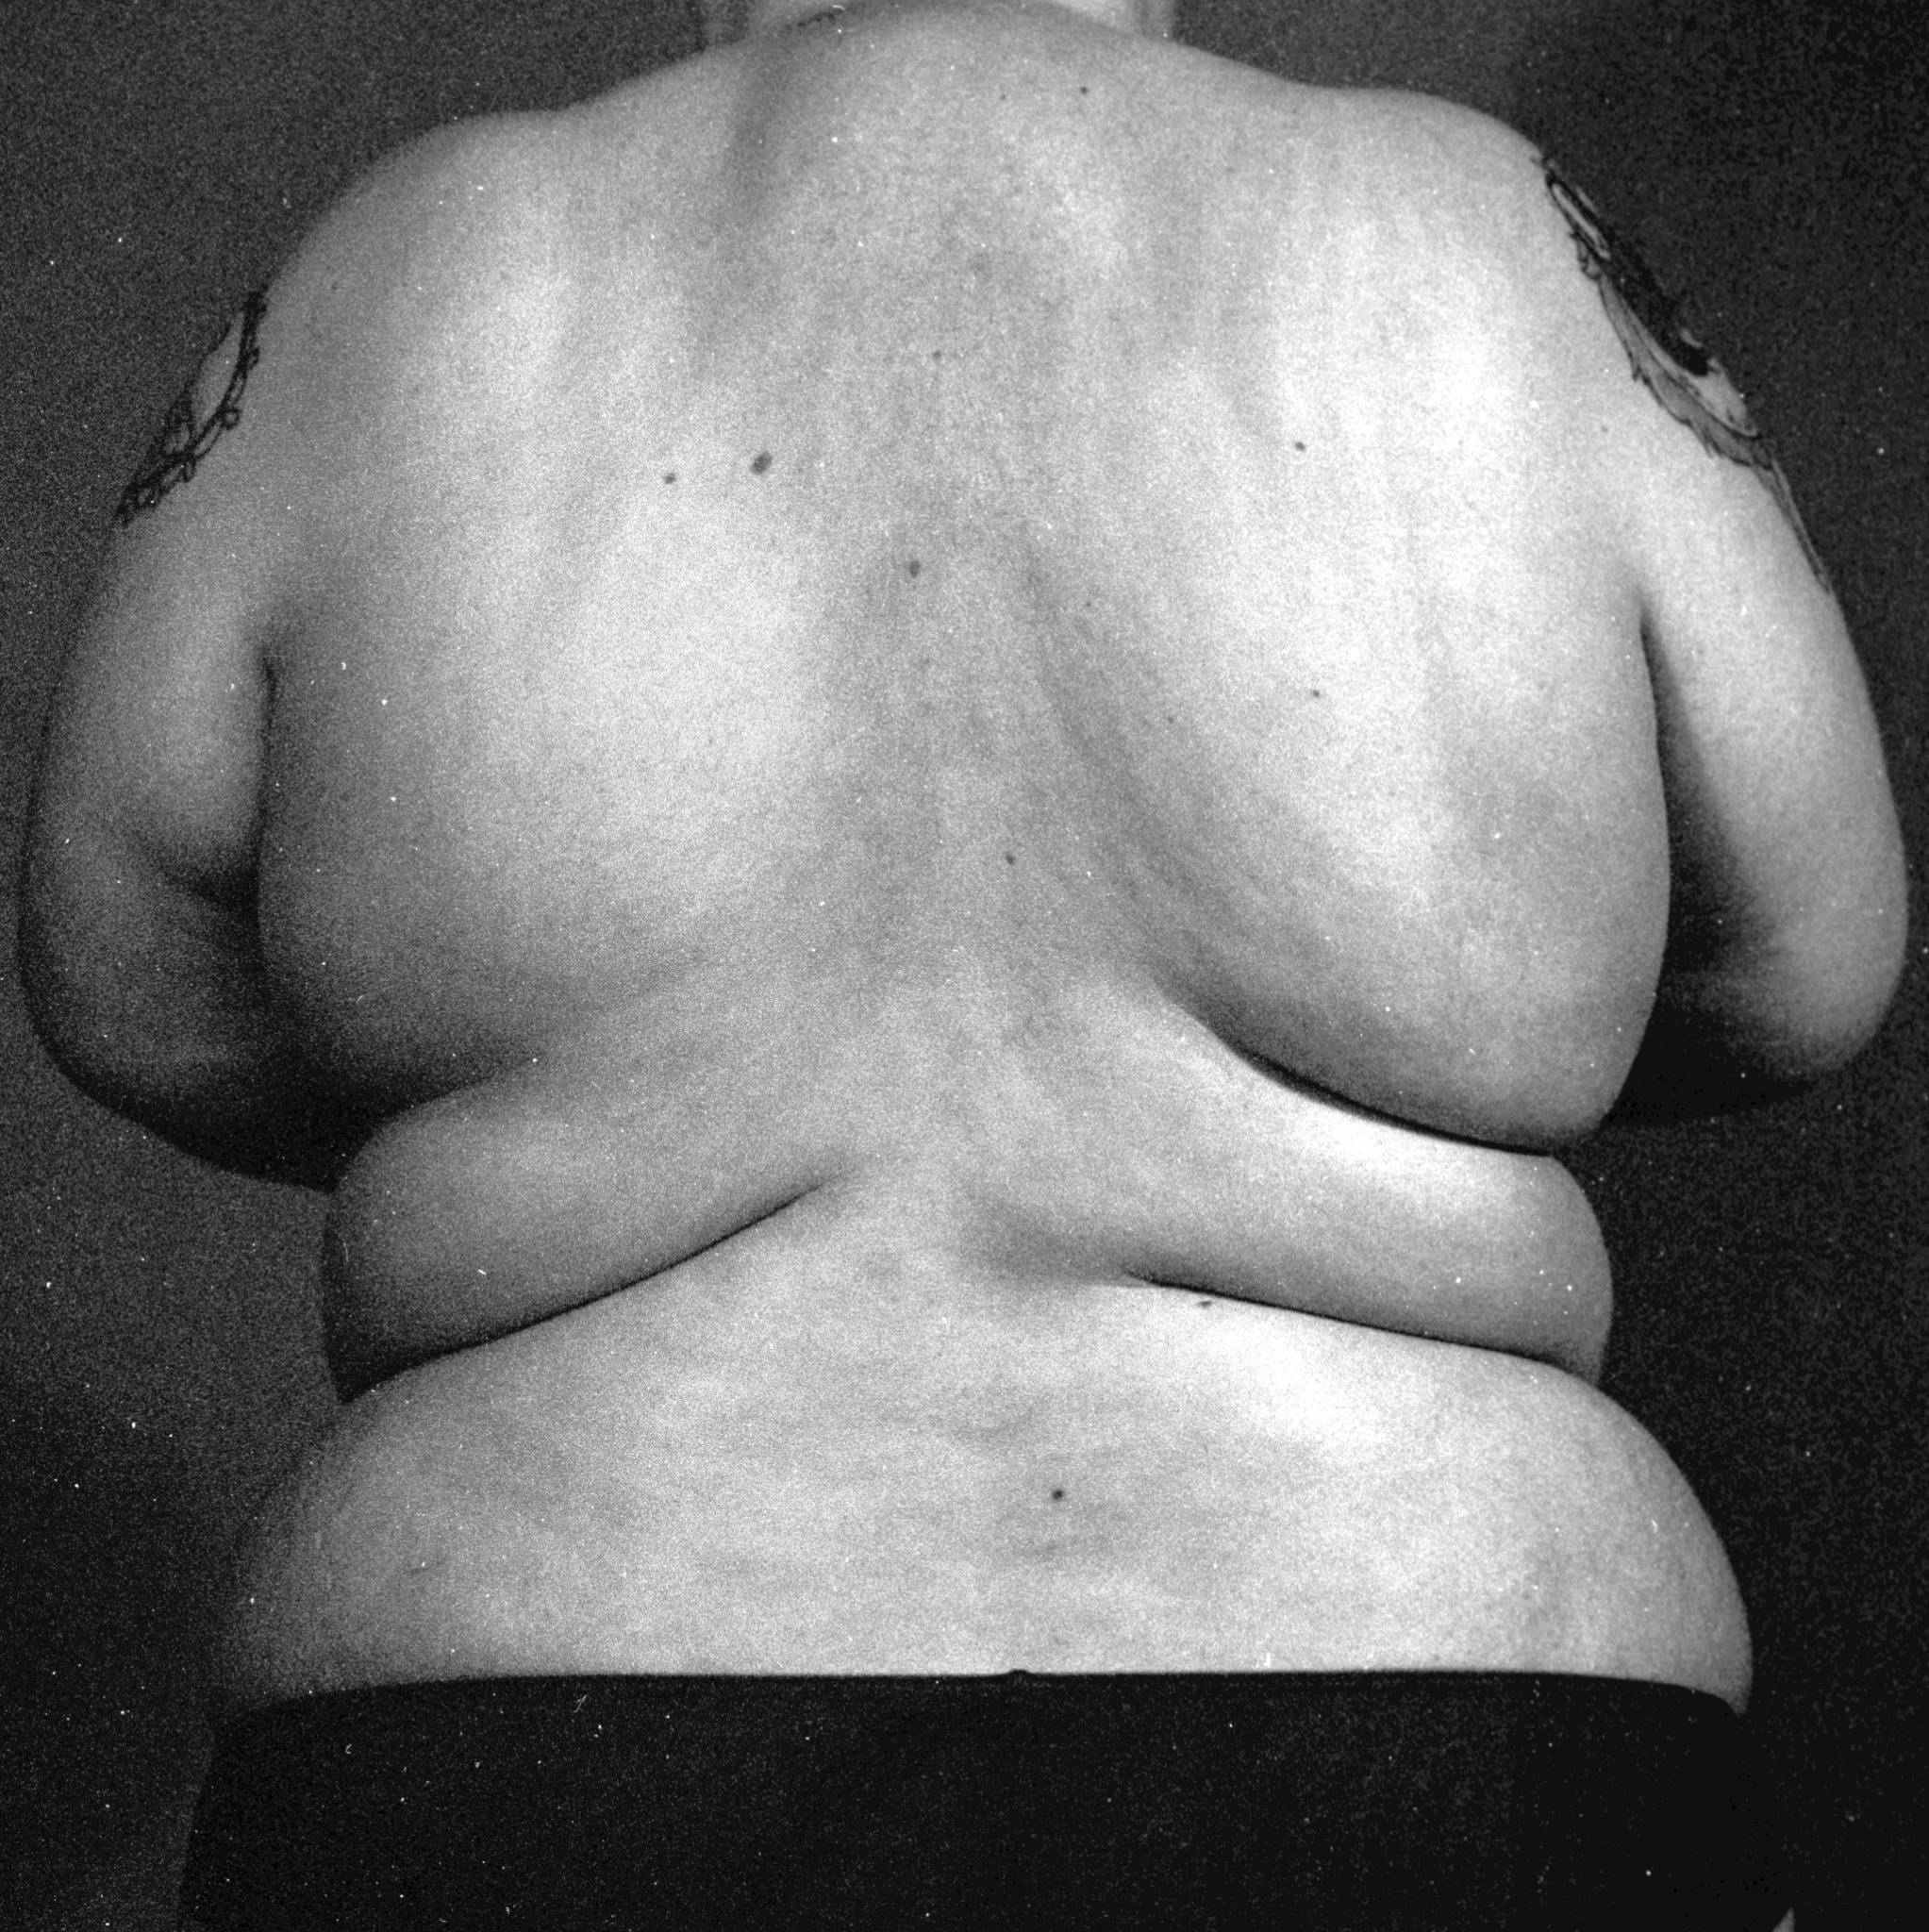 Image shows a black and white image of a person's back, unclothed, with lots of grain